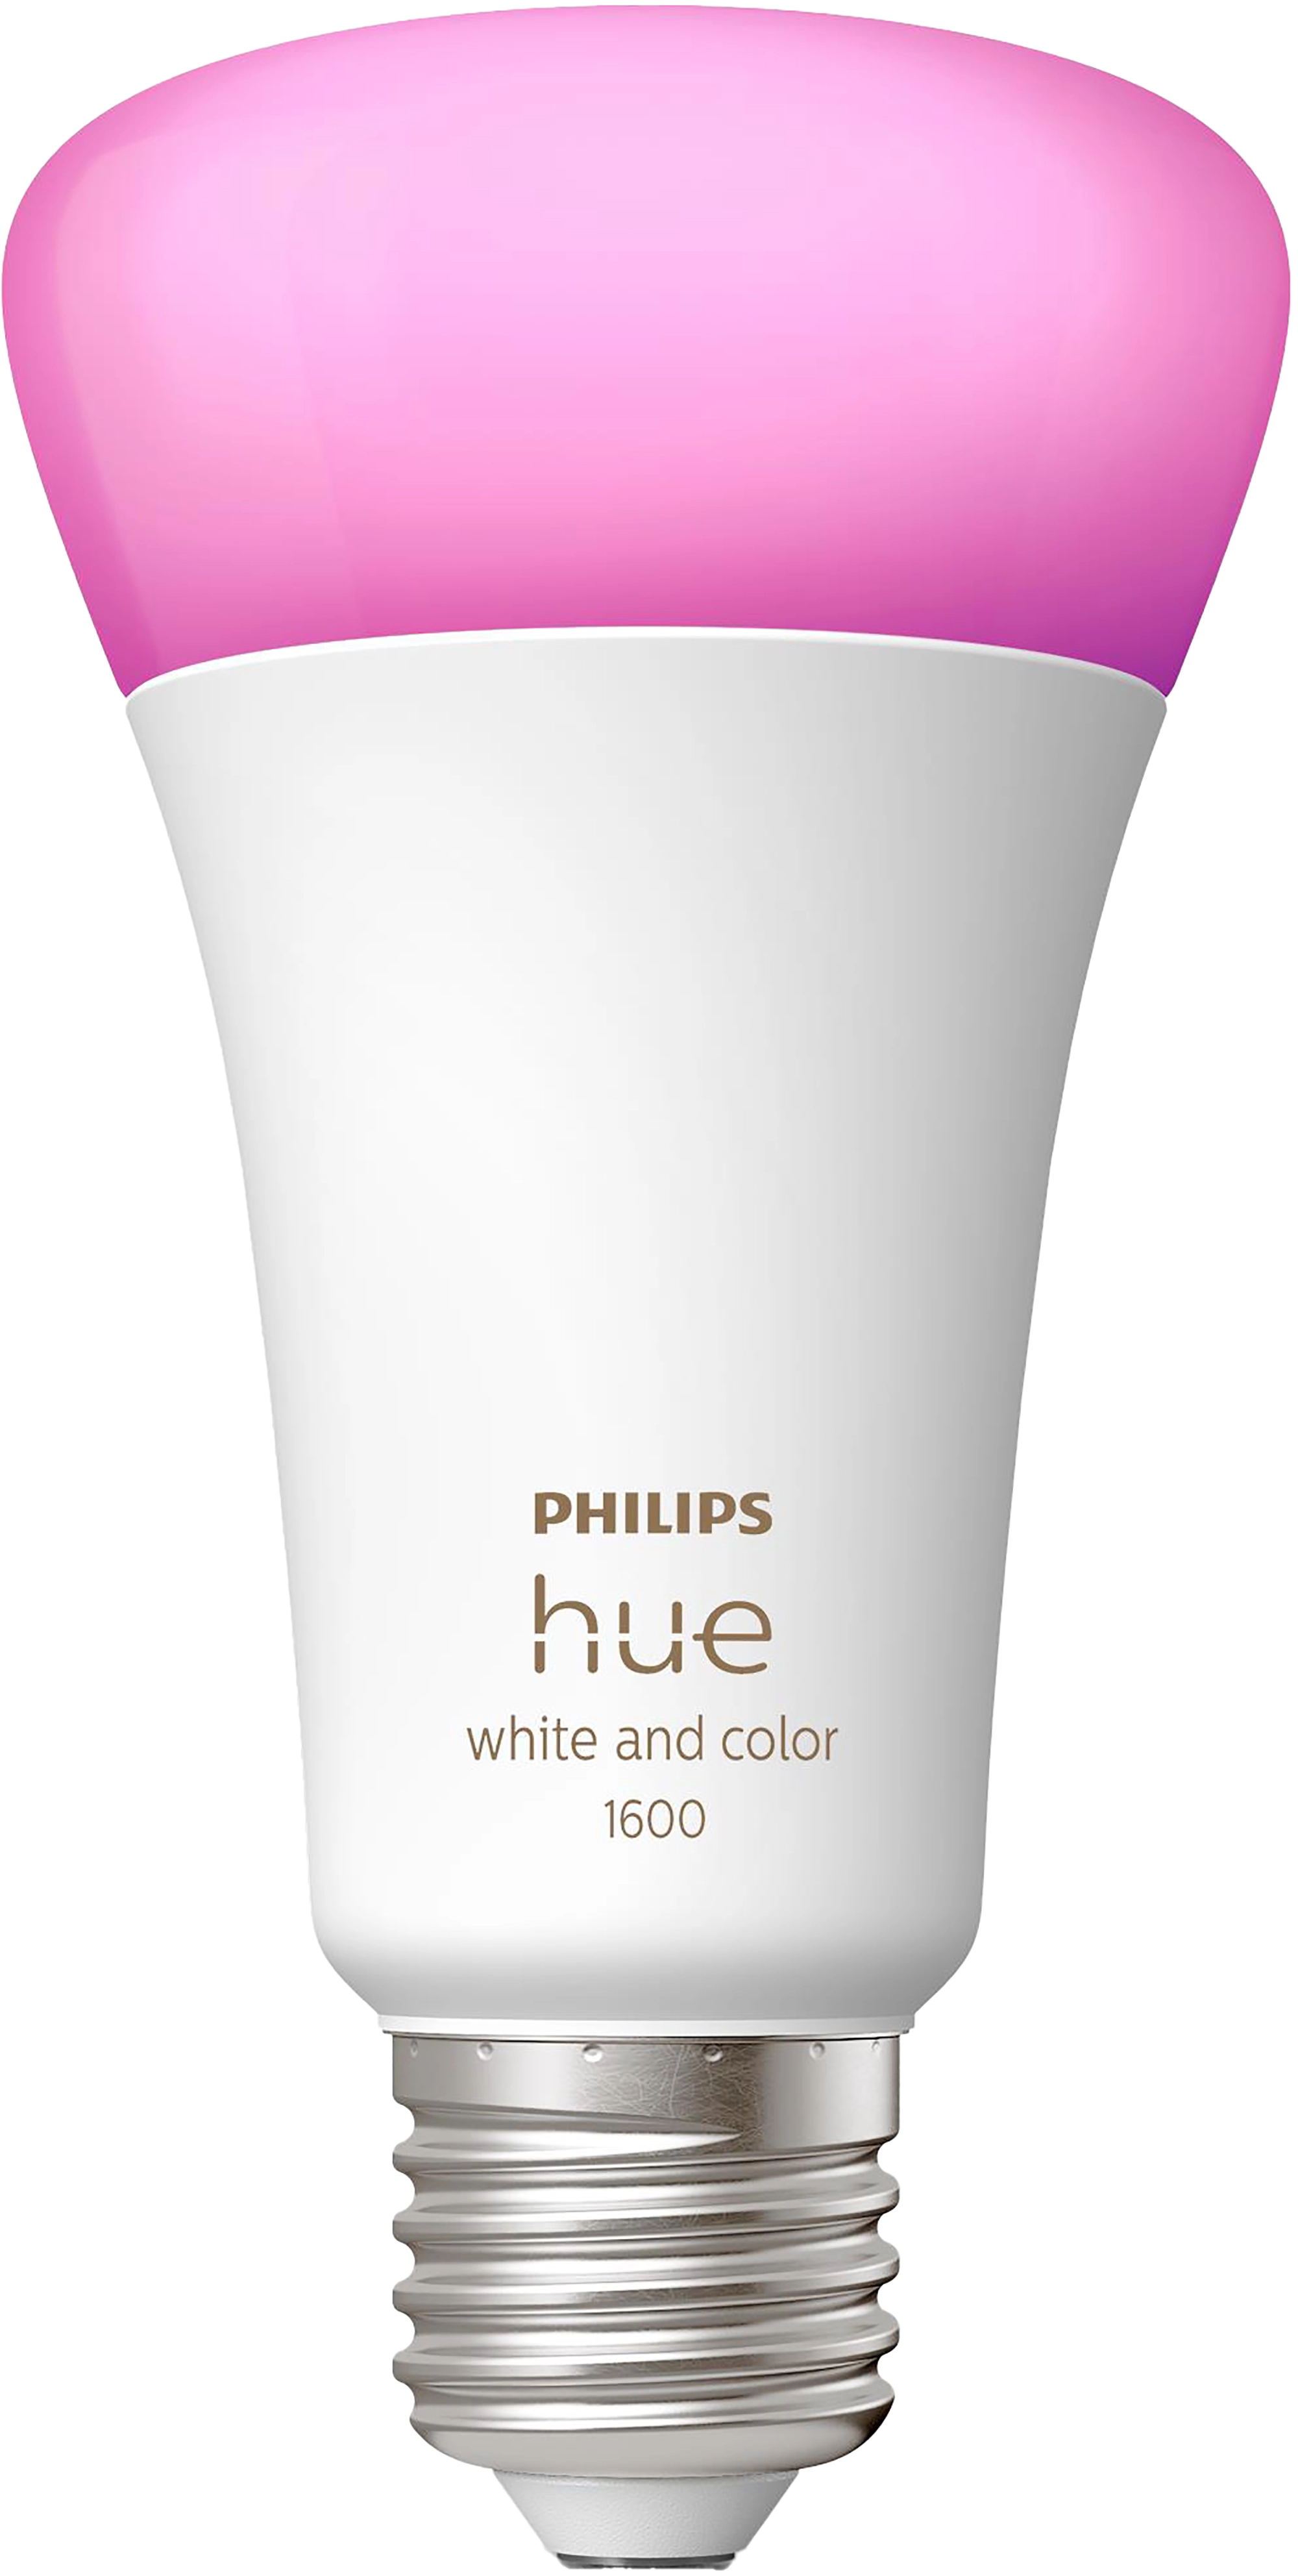 Philips hue white and color ambiance1600蛍光灯/電球 - 蛍光灯/電球